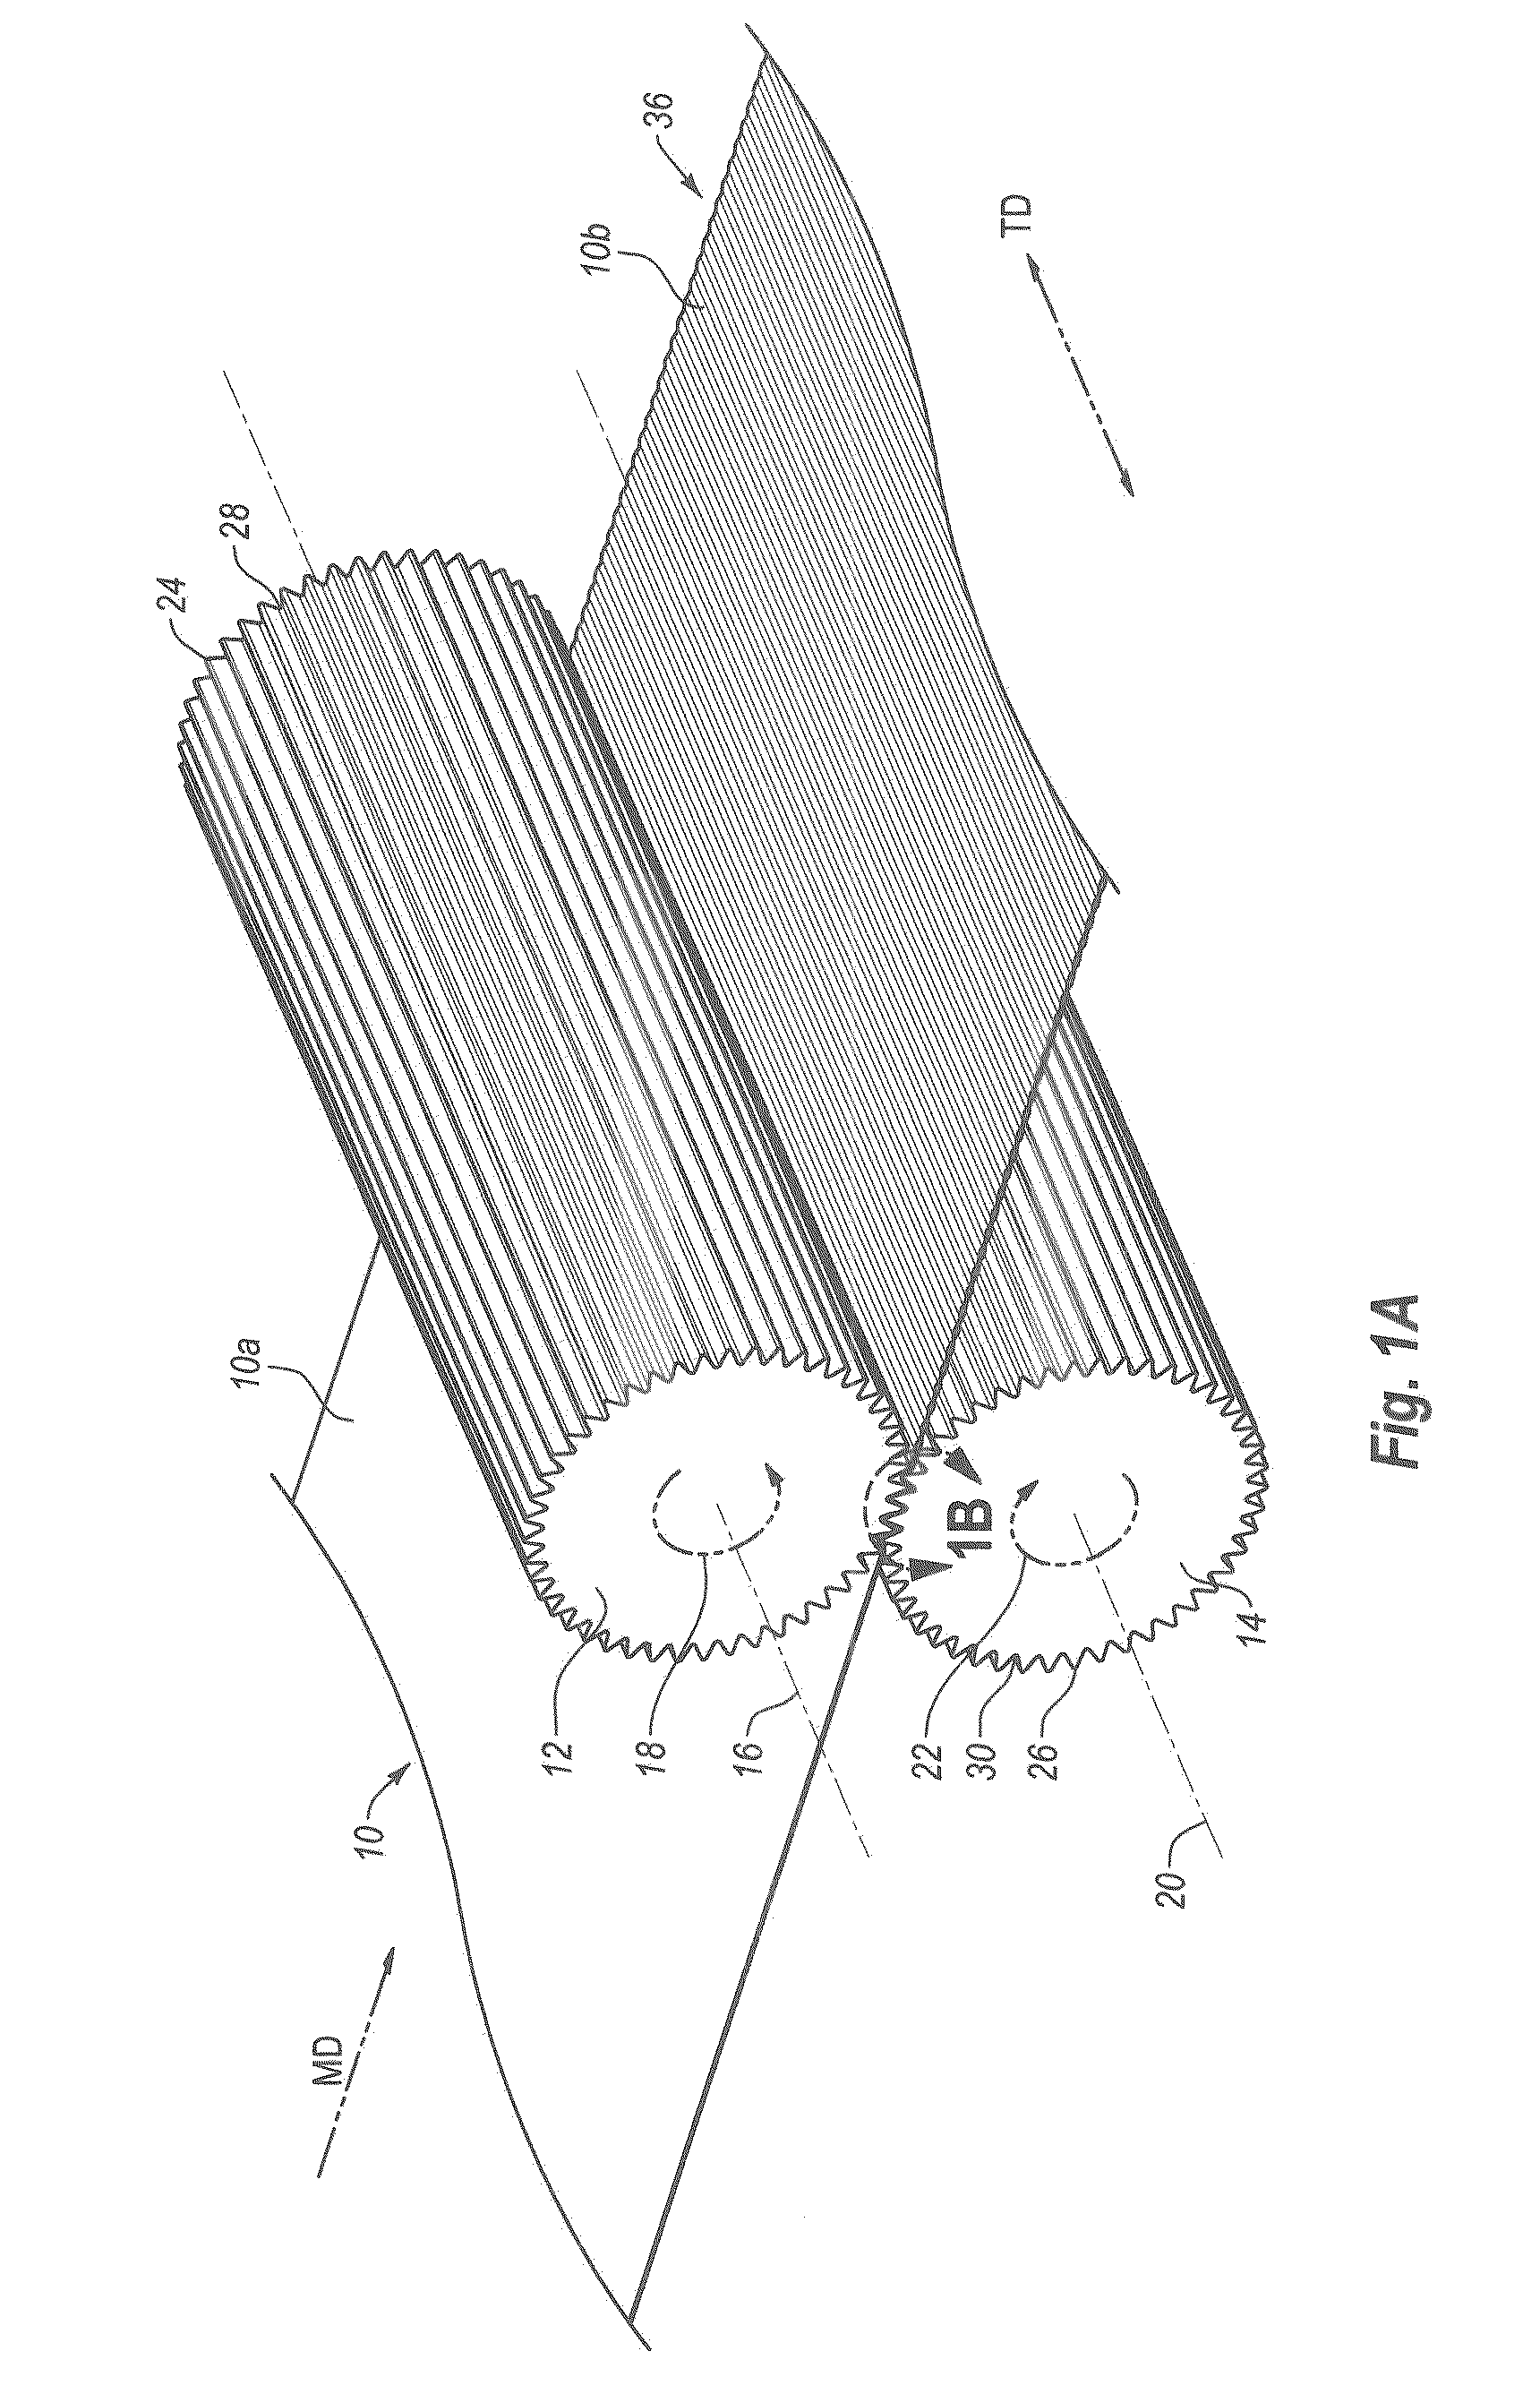 Multi-Layered Lightly-Laminated Films and Methods of Making The Same